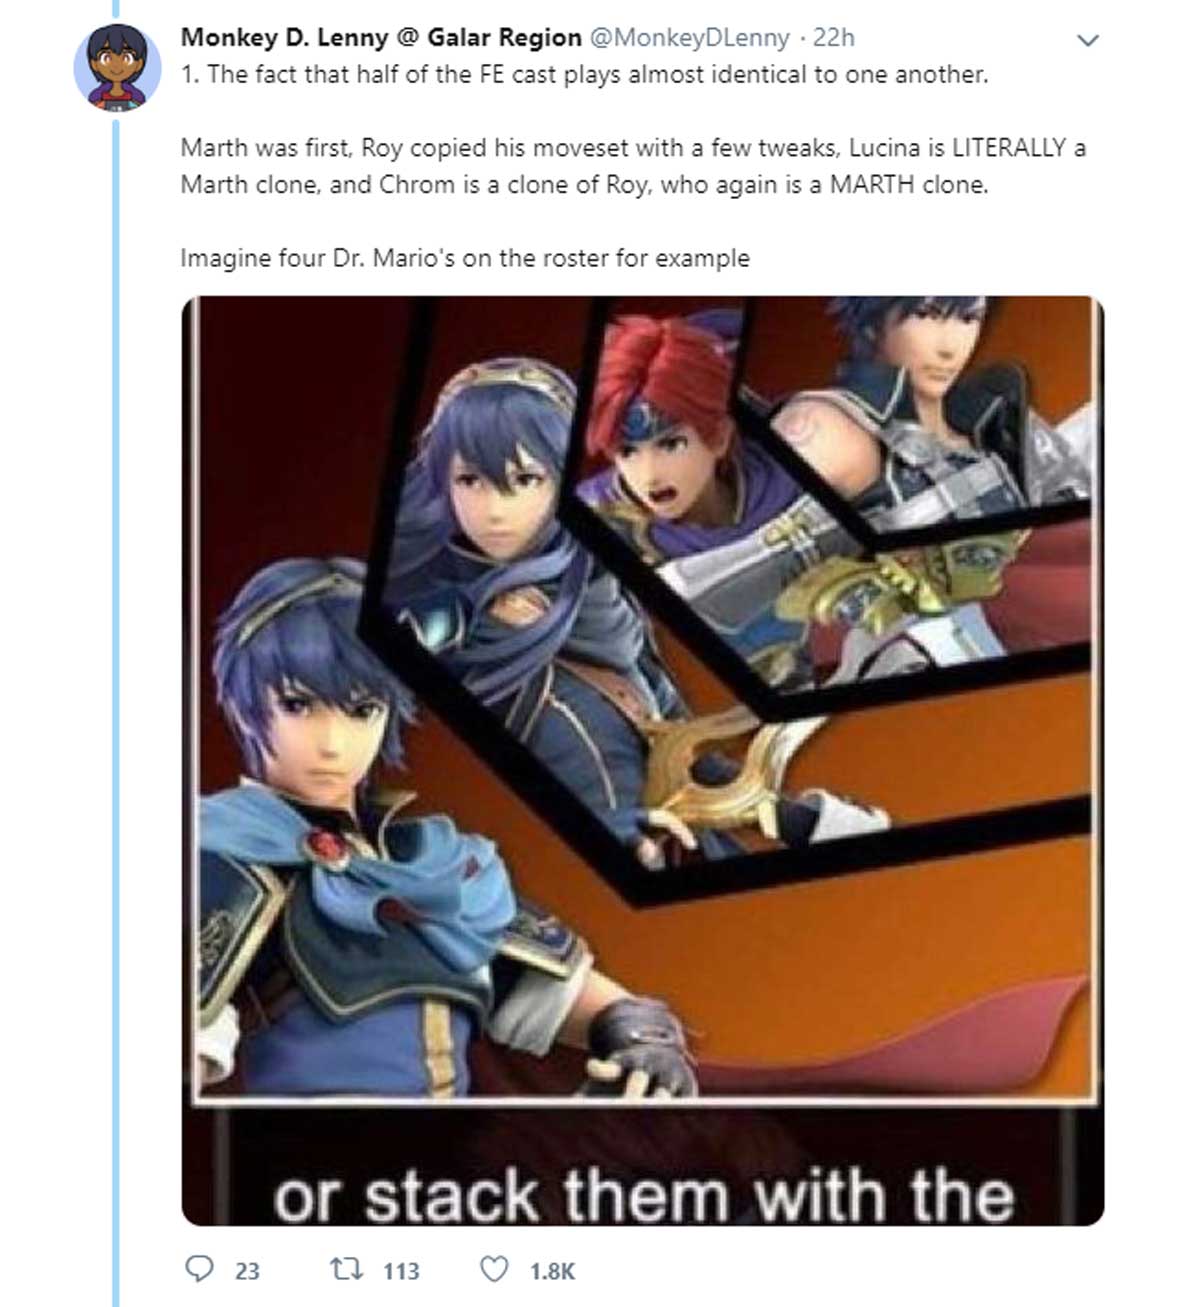 cartoon - Monkey D. Lenny @ Galar Region 22h 1. The fact that half of the Fe cast plays almost identical to one another. Marth was first, Roy copied his moveset with a few tweaks, Lucina is Literally a Marth clone, and Chrom is a clone of Roy, who again i